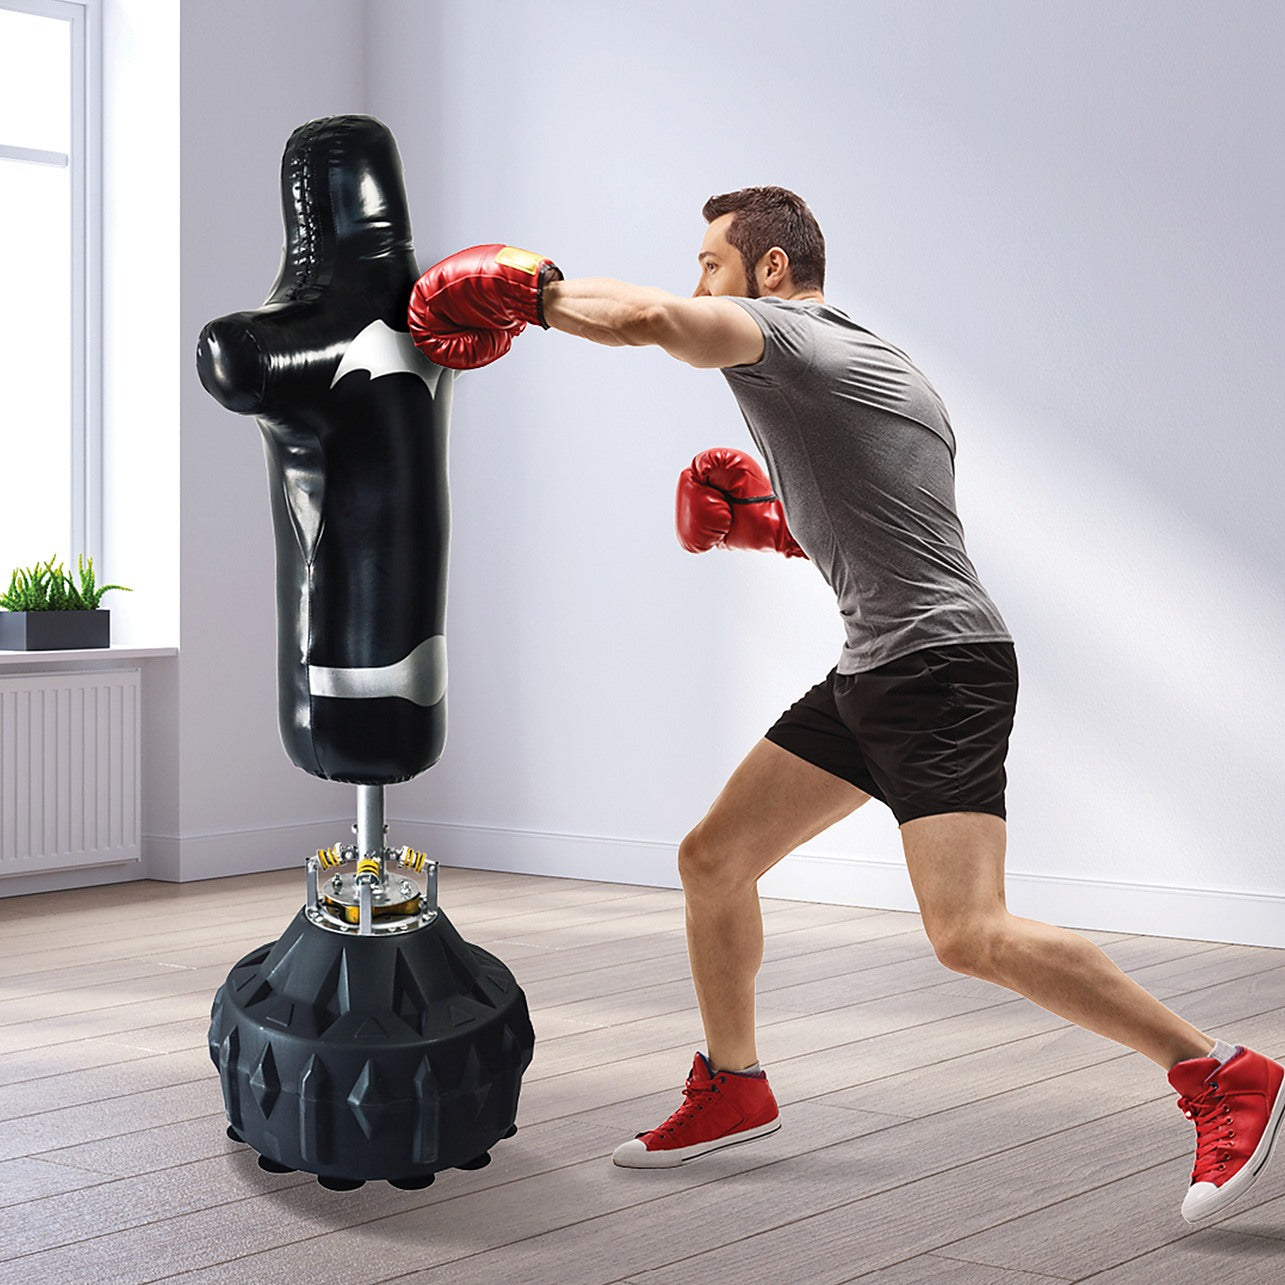 Does A Punching Bag Build Muscle? | FightCamp